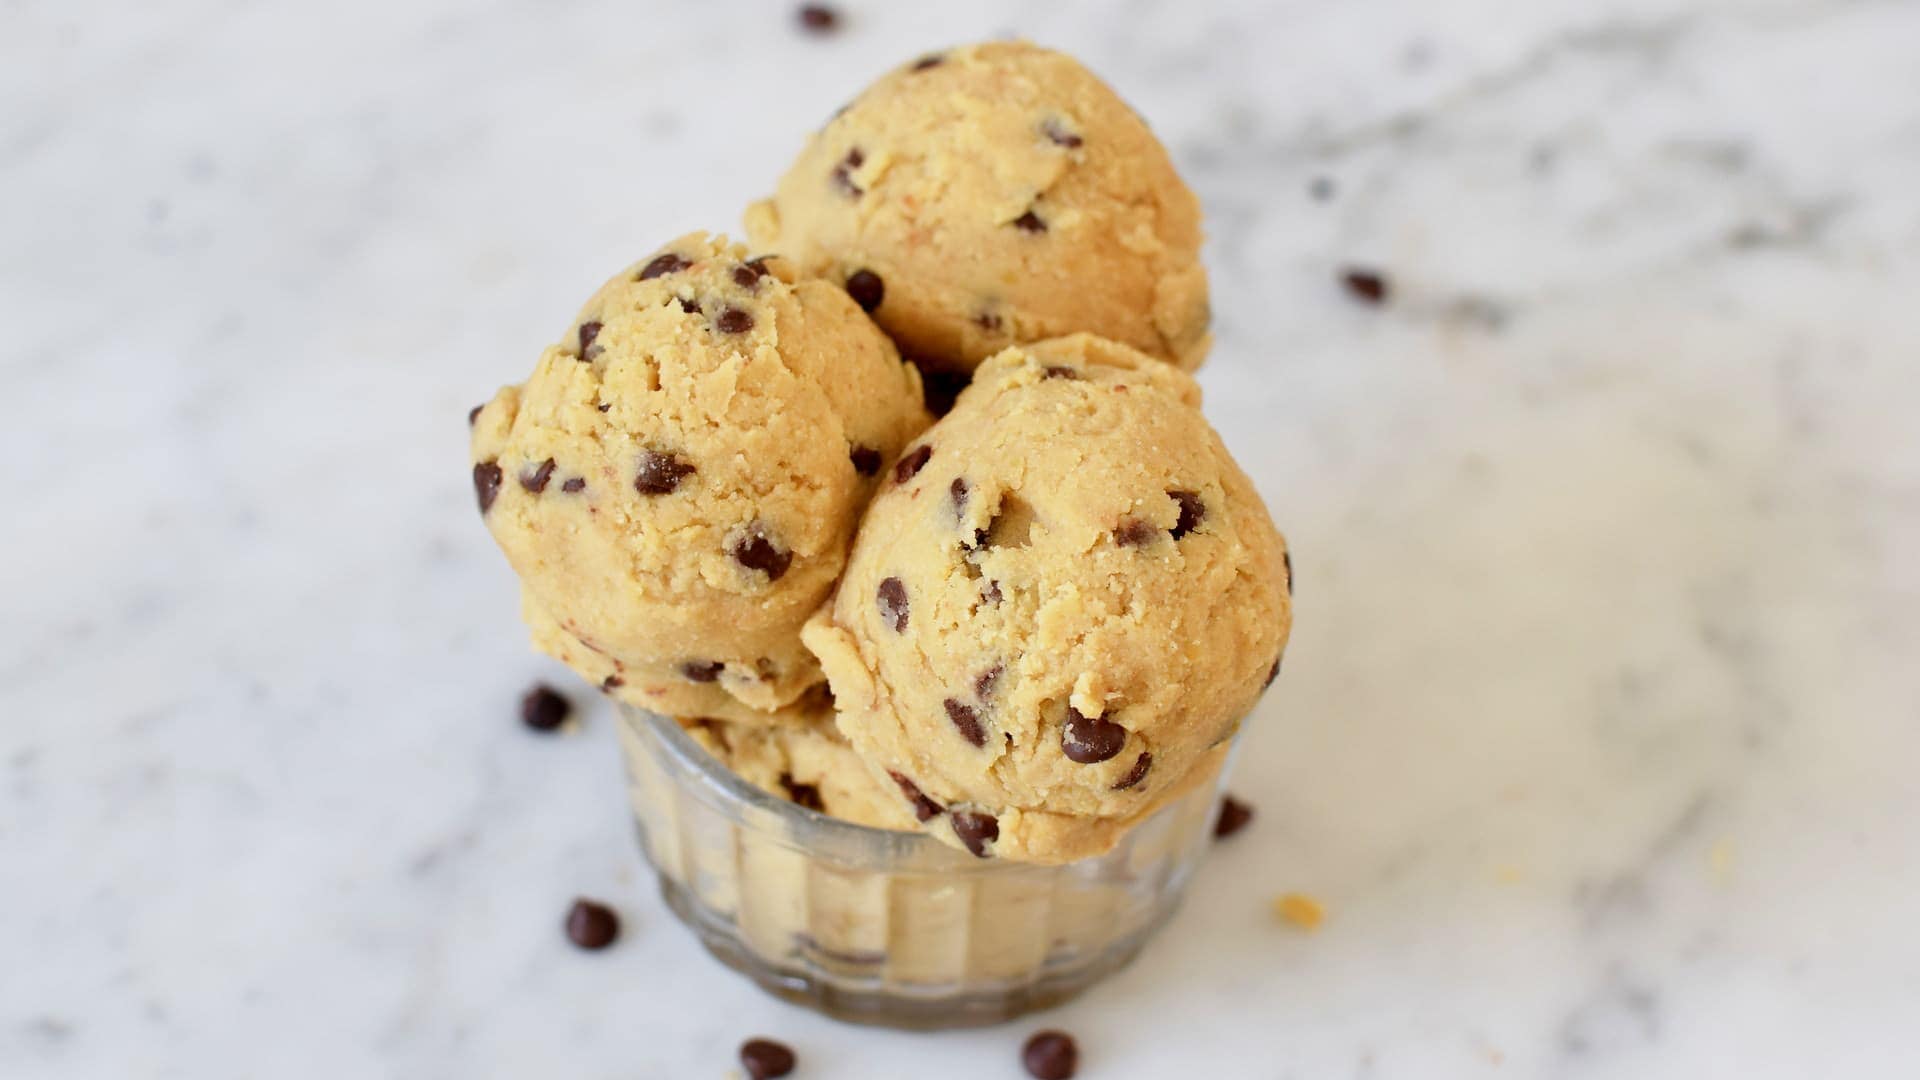 Horizontal shot of scoops of vegan cookie dough with chocolate chips